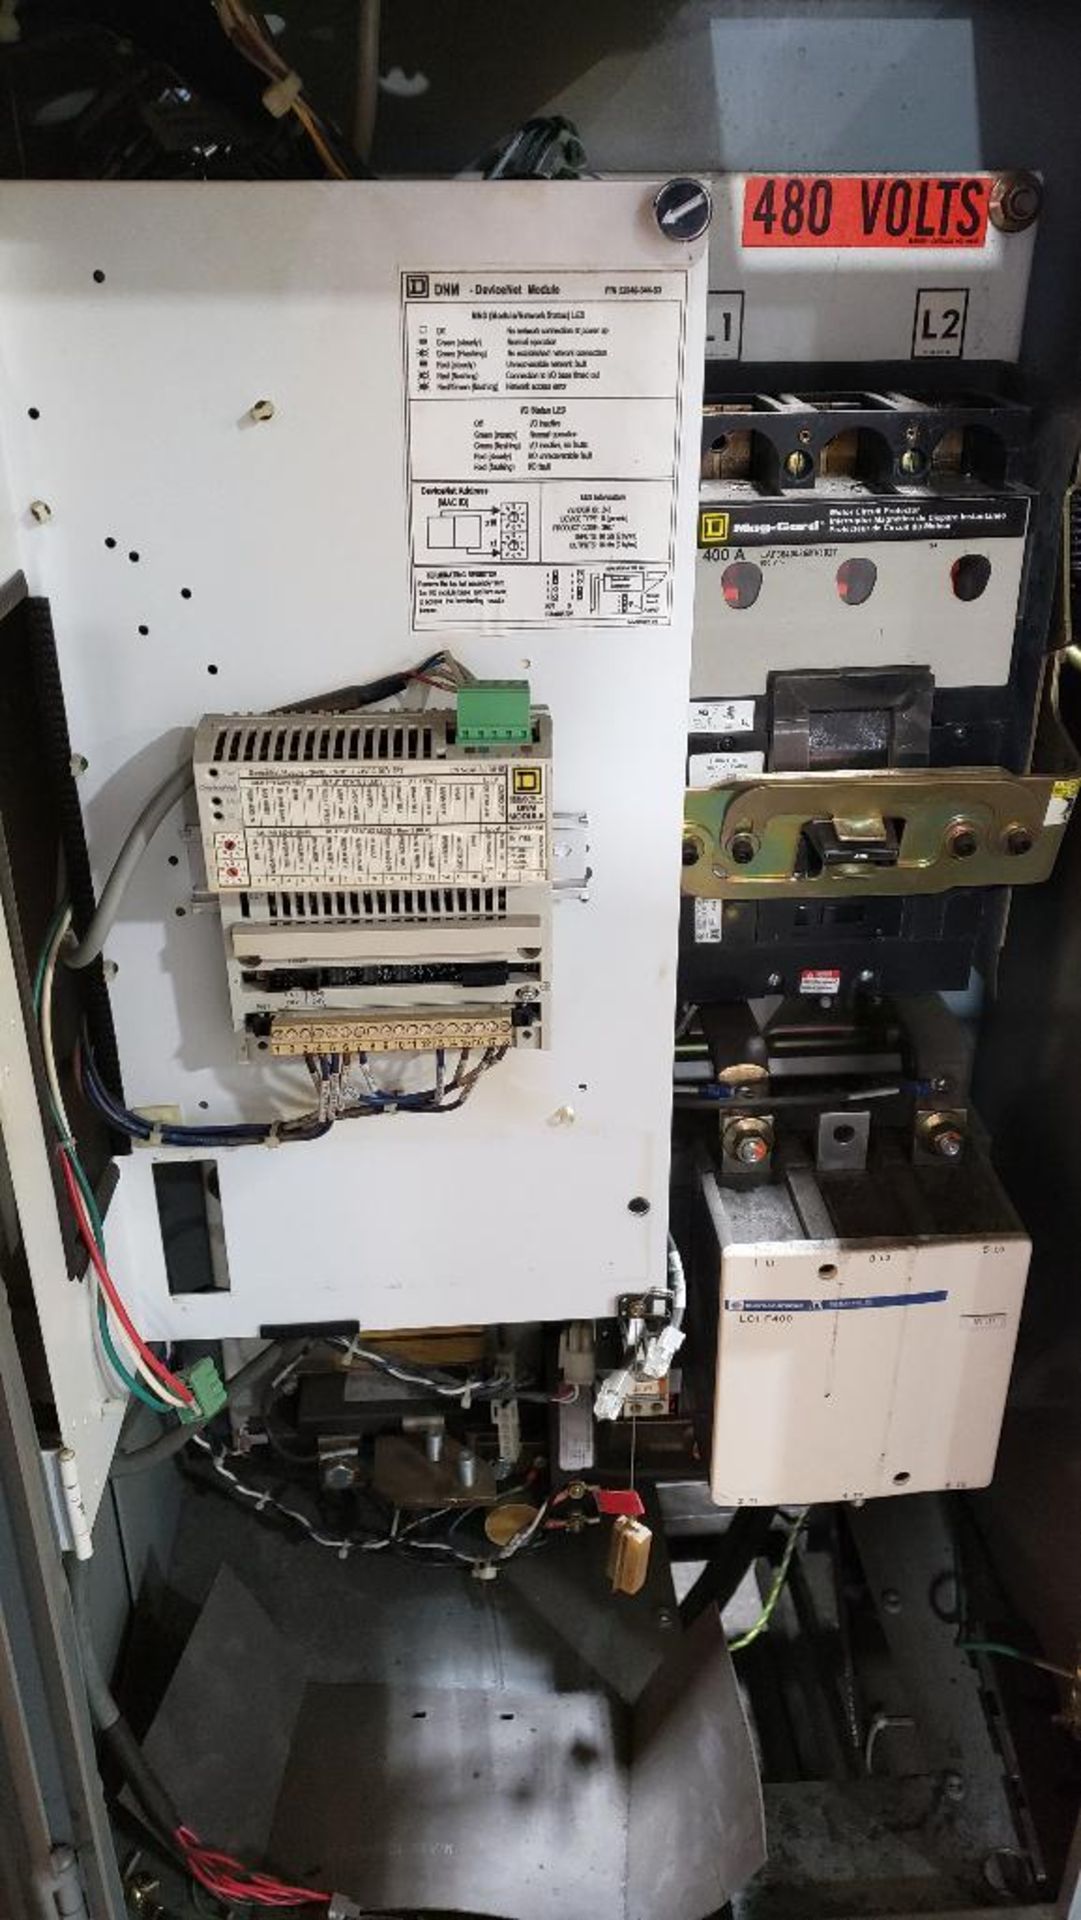 Fanuc R-2000iA/200F robot with Fanuc System R-J3iB controller. - Image 15 of 16